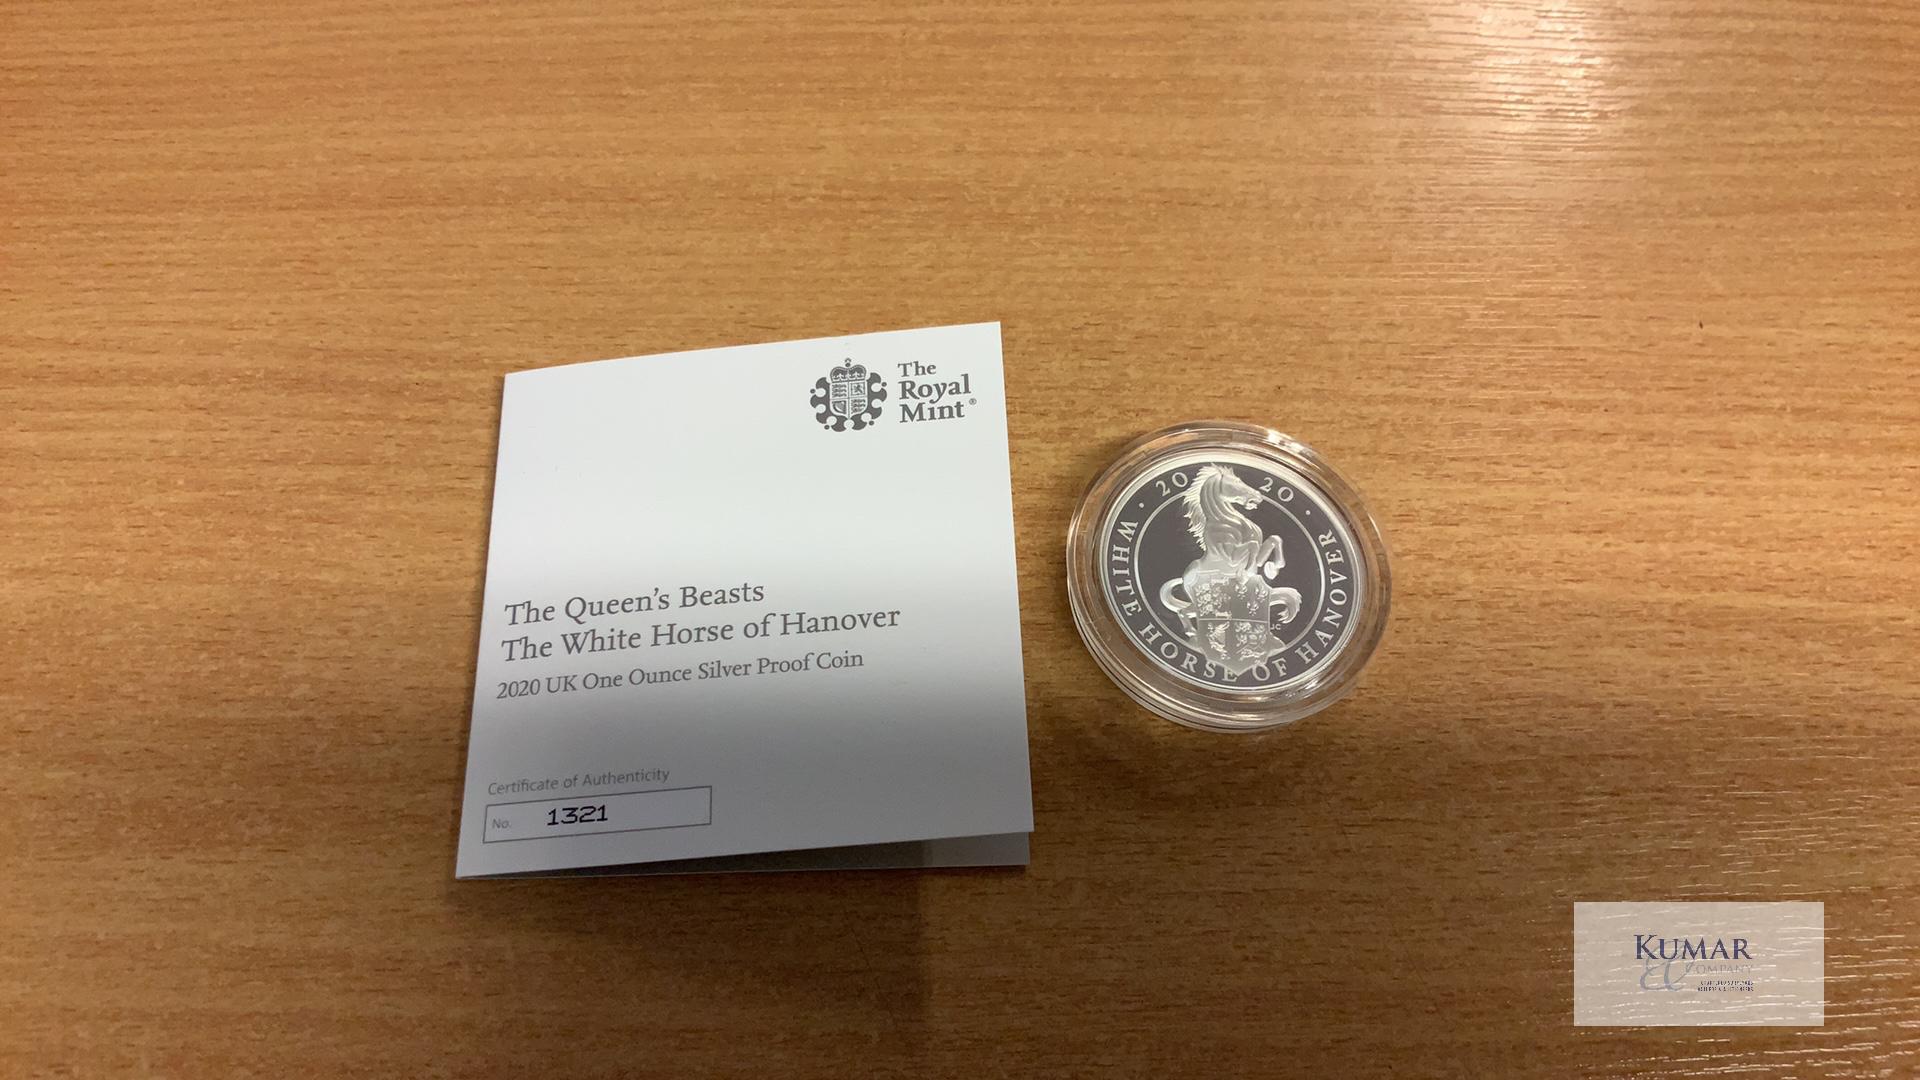 The Royal Mint Collection- The Queens Beasts. The White Horse of Hanover 2020 UK One Ounce Silver - Image 3 of 4